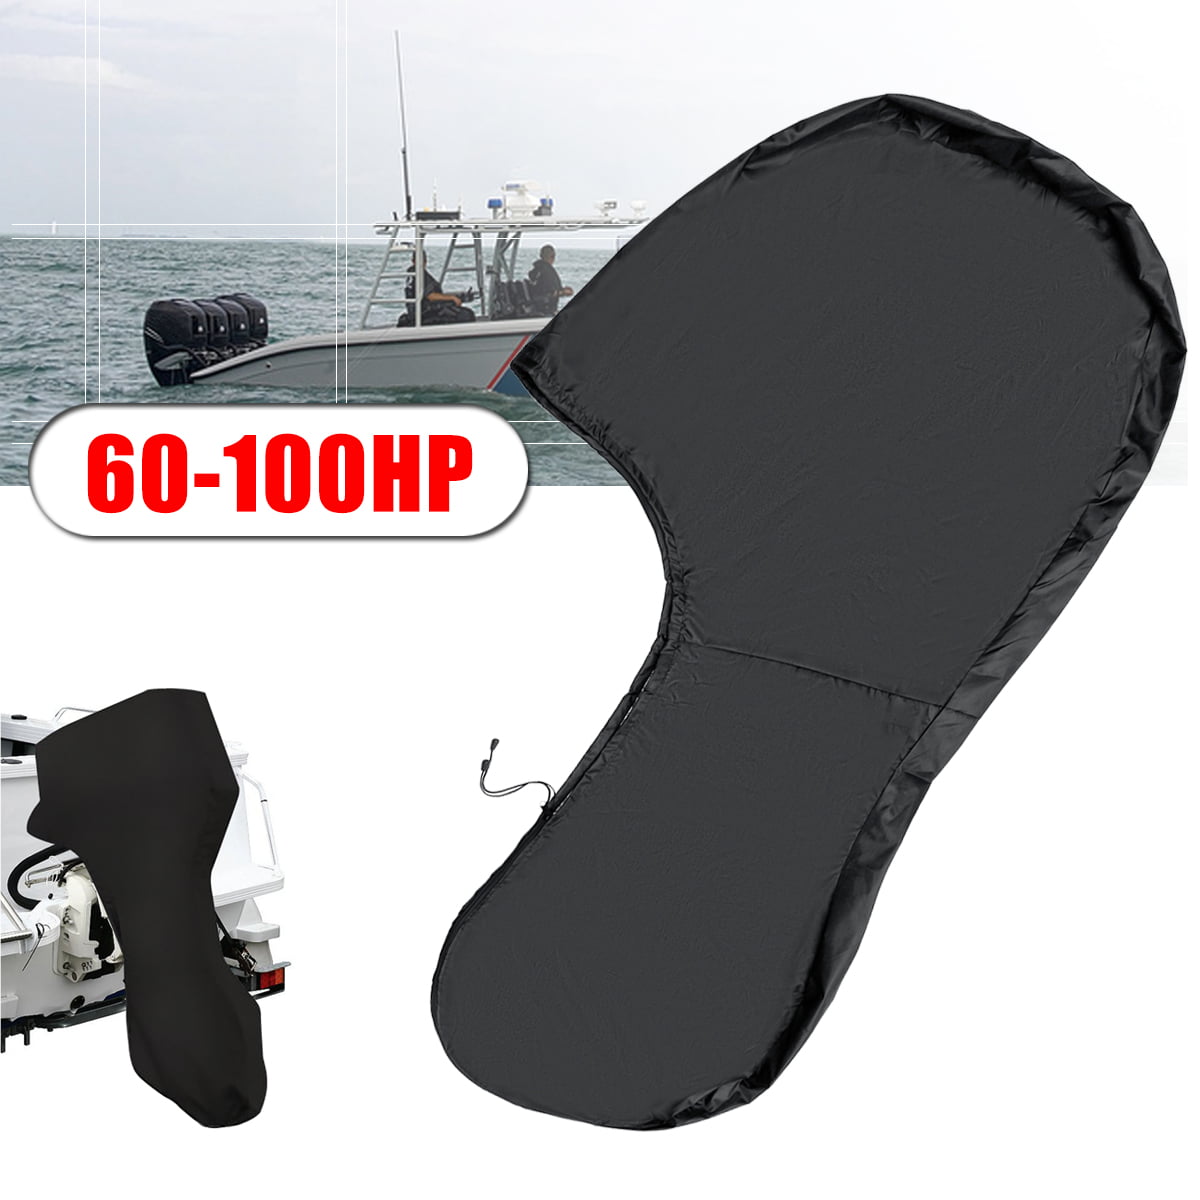 Full Outboard Motor Engine Cover Waterproof Boat Cover with 600D Heavy Duty Oxford Fabric TeBaisea Outboard Motor Cover Extra PVC Coating Fit for Motors